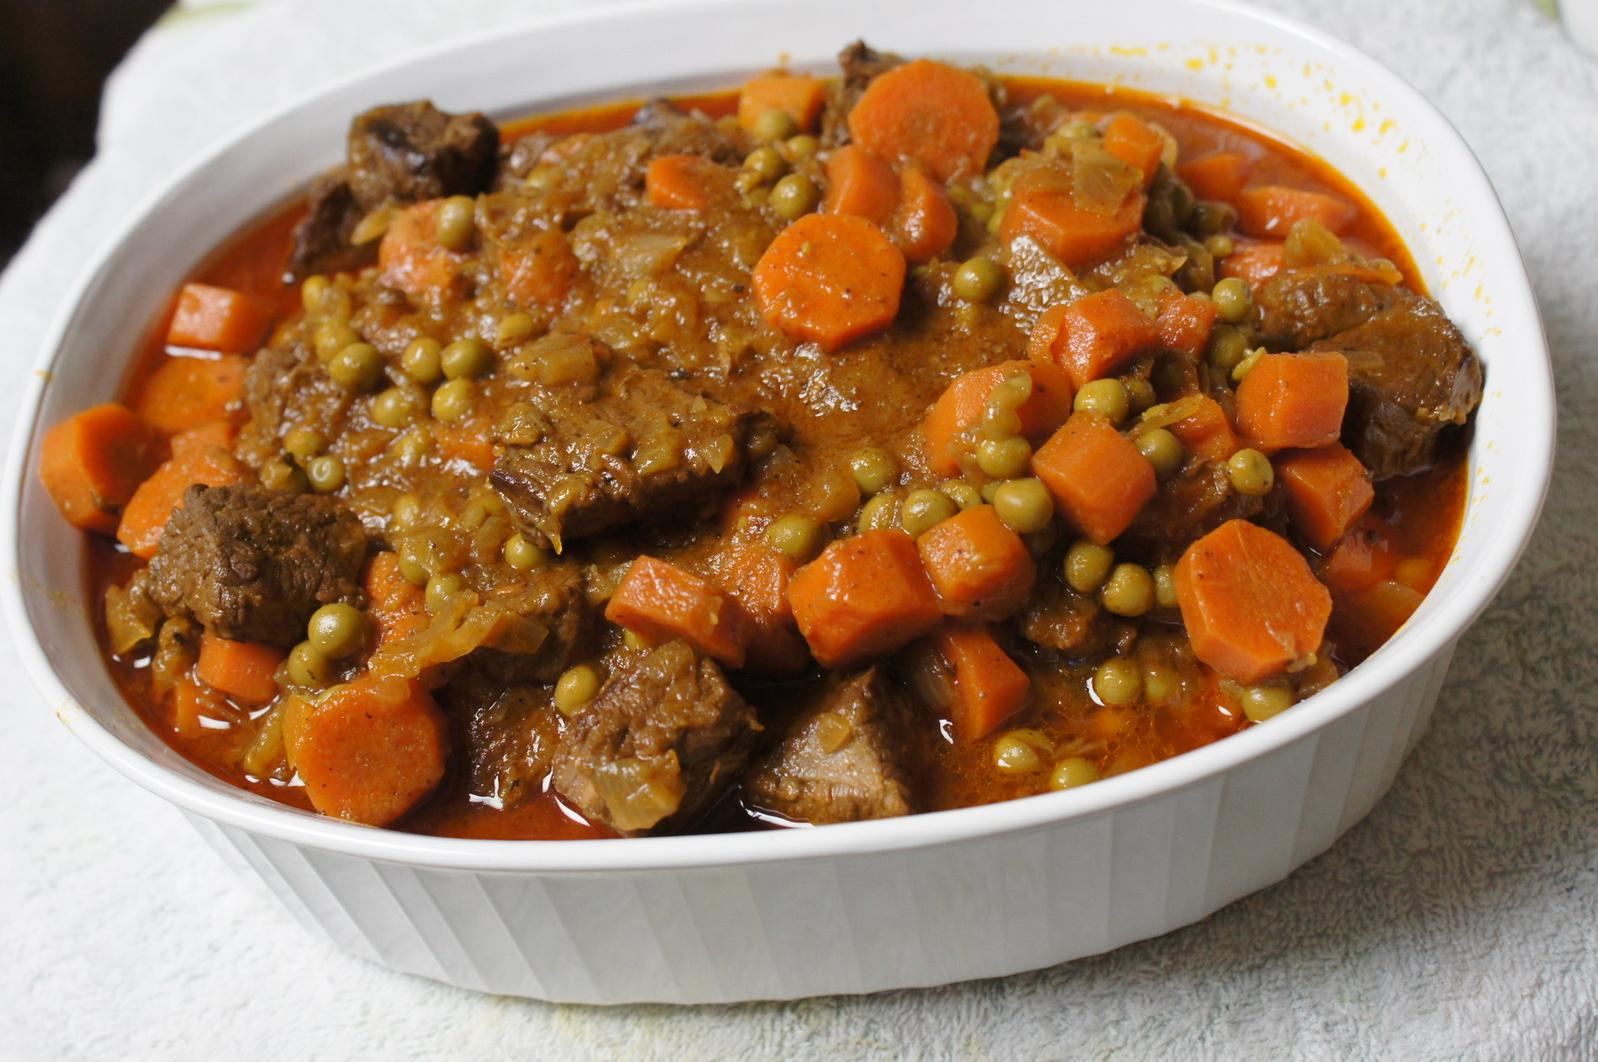  A spoonful of tender and buttery beef nestled in a bed of peas.